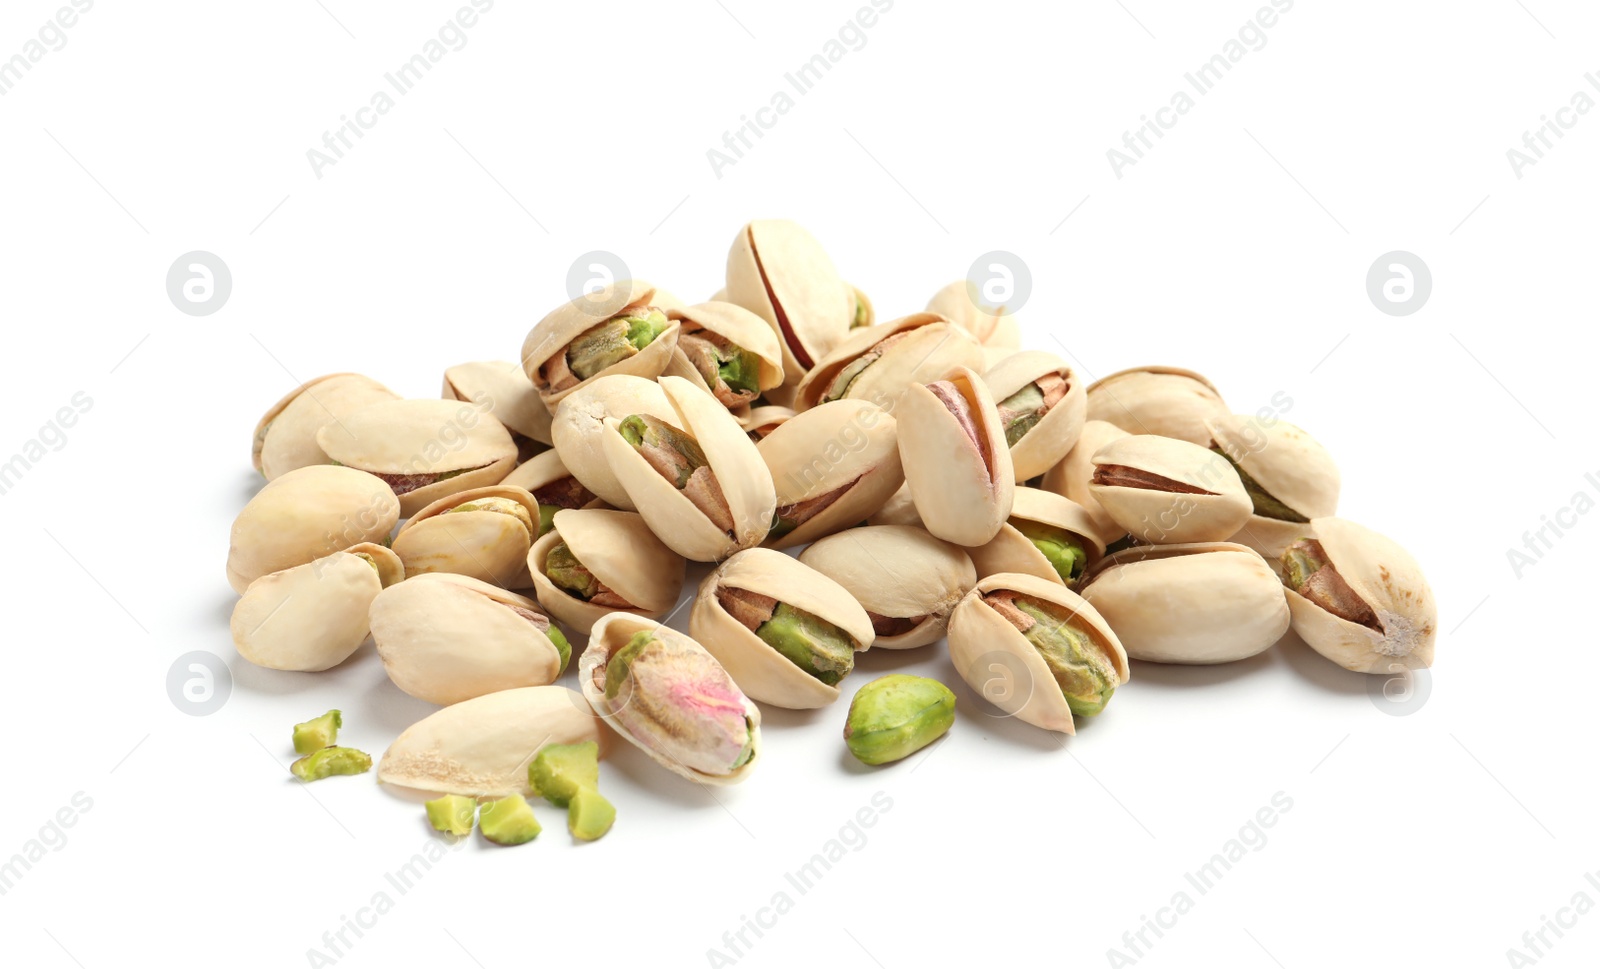 Photo of Heap of organic pistachio nuts isolated on white